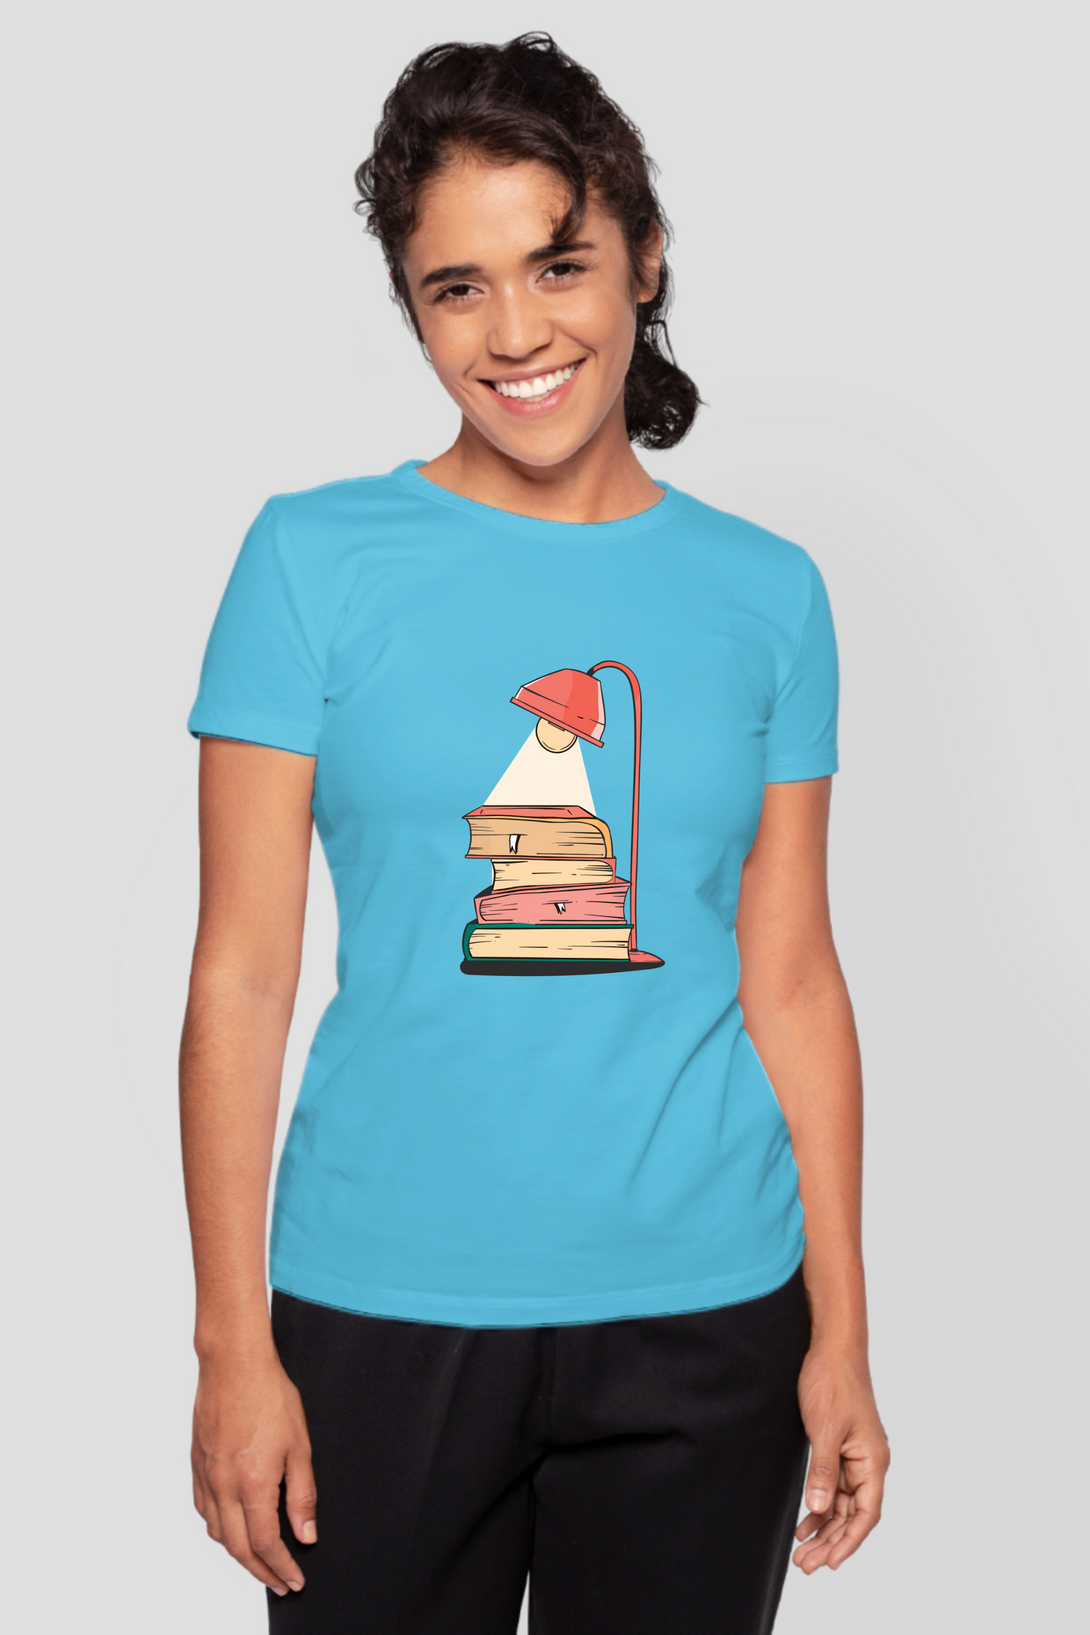 Lamp Of Knowledge Printed T-Shirt For Women - WowWaves - 9